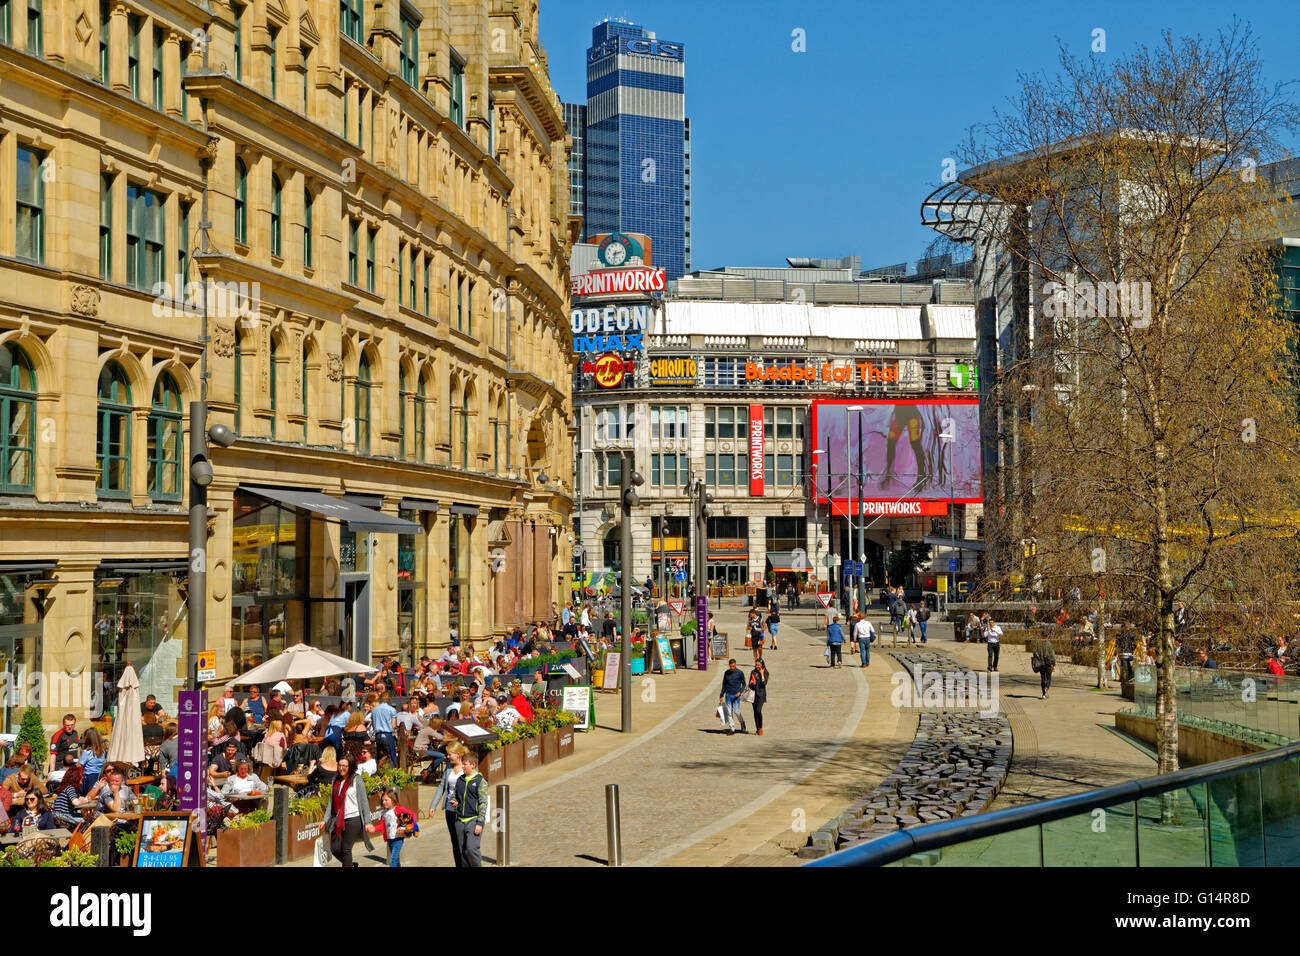 Exchange Square Manchester with Corn Exchange and the Printworks complex in the background. Greater Manchester, England Stock Photo